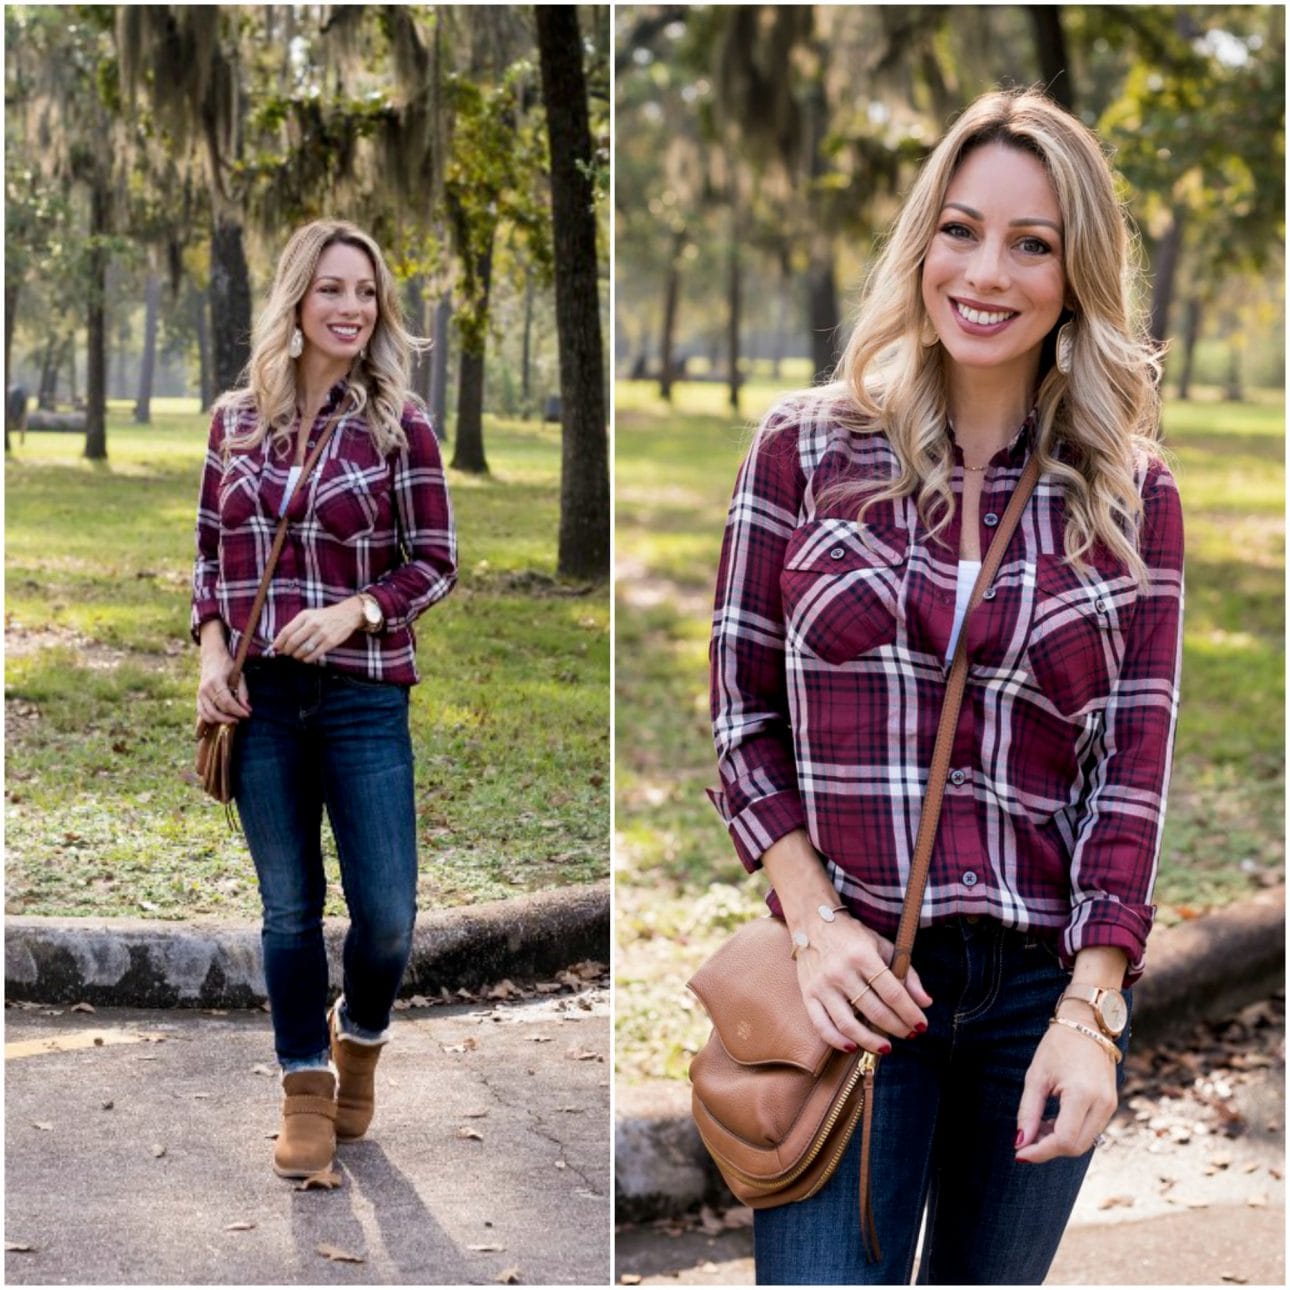 Fall outfit - plaid top and jeans with booties